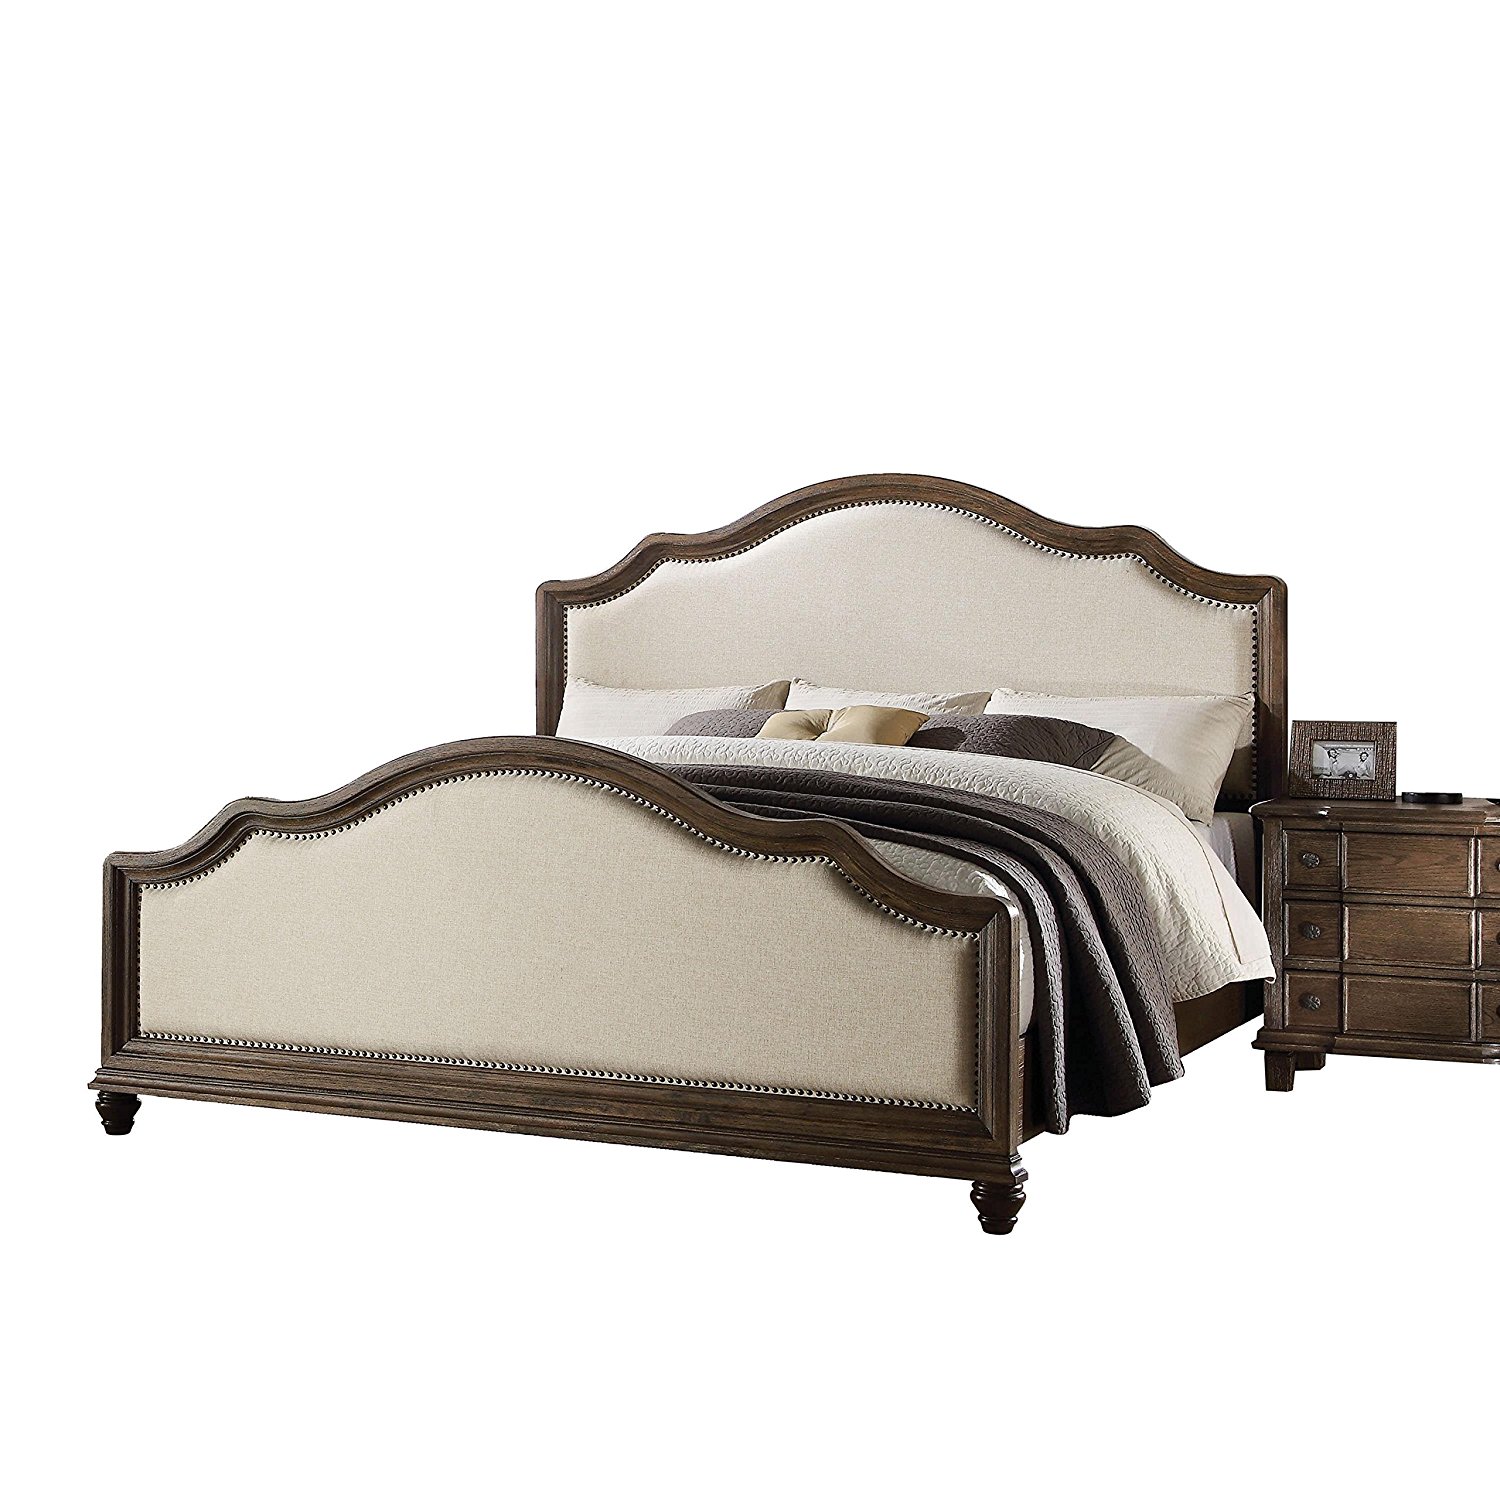 88" X 82" X 59" Beige Linen And Weathered Oak Eastern King Bed